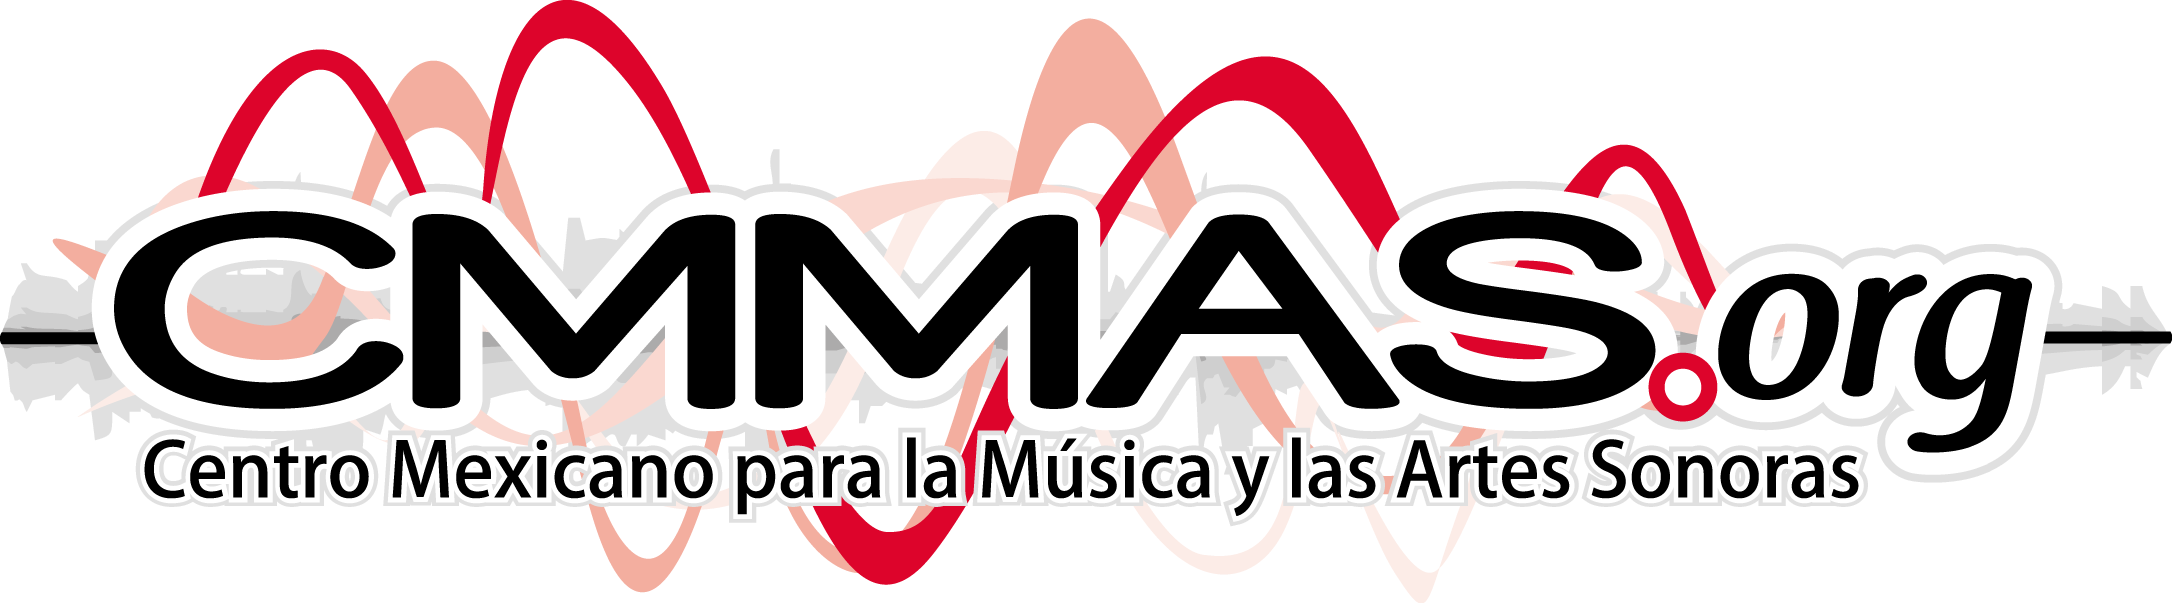 He Composed Music For Several Projects - Cmmas Logo (2172x603)